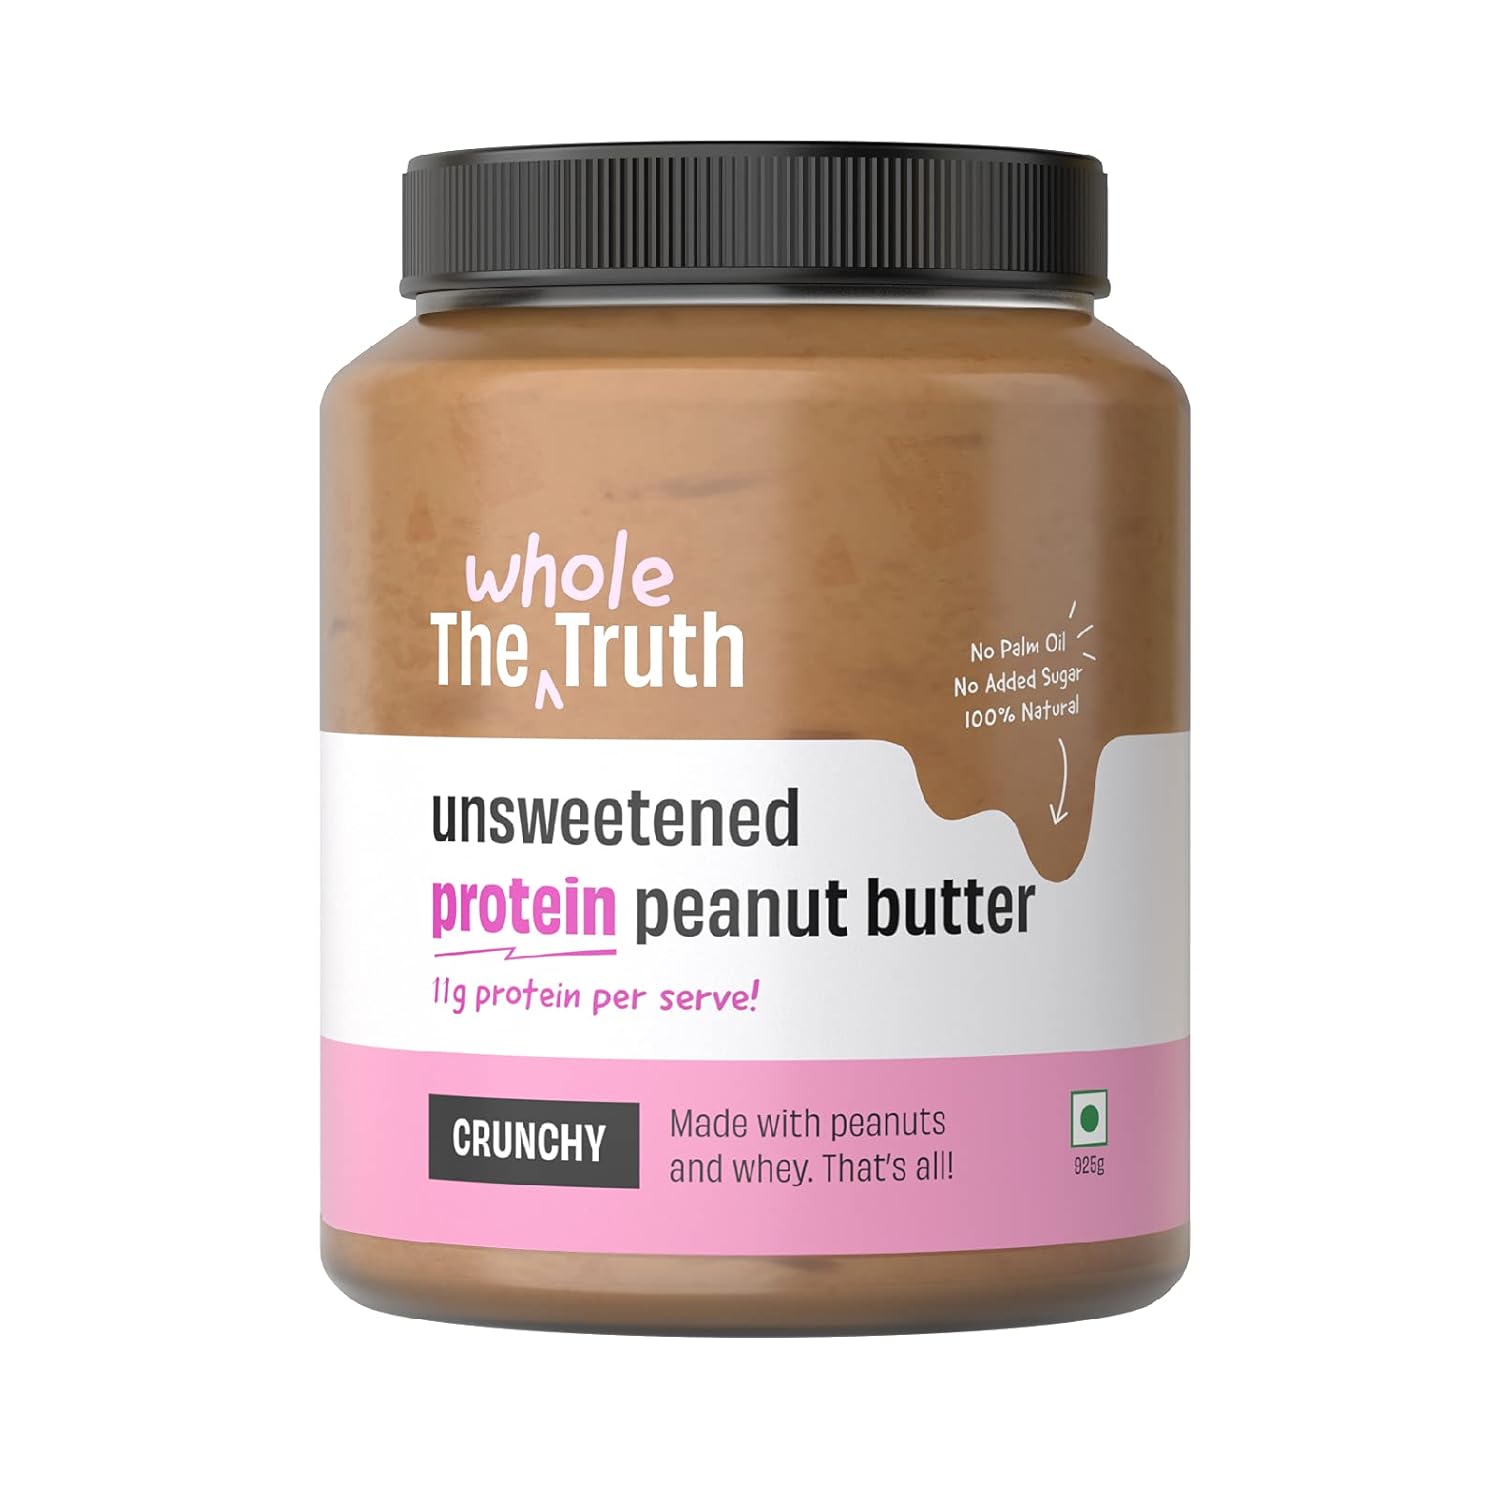 the whole truth Whey Protein Peanut Butter